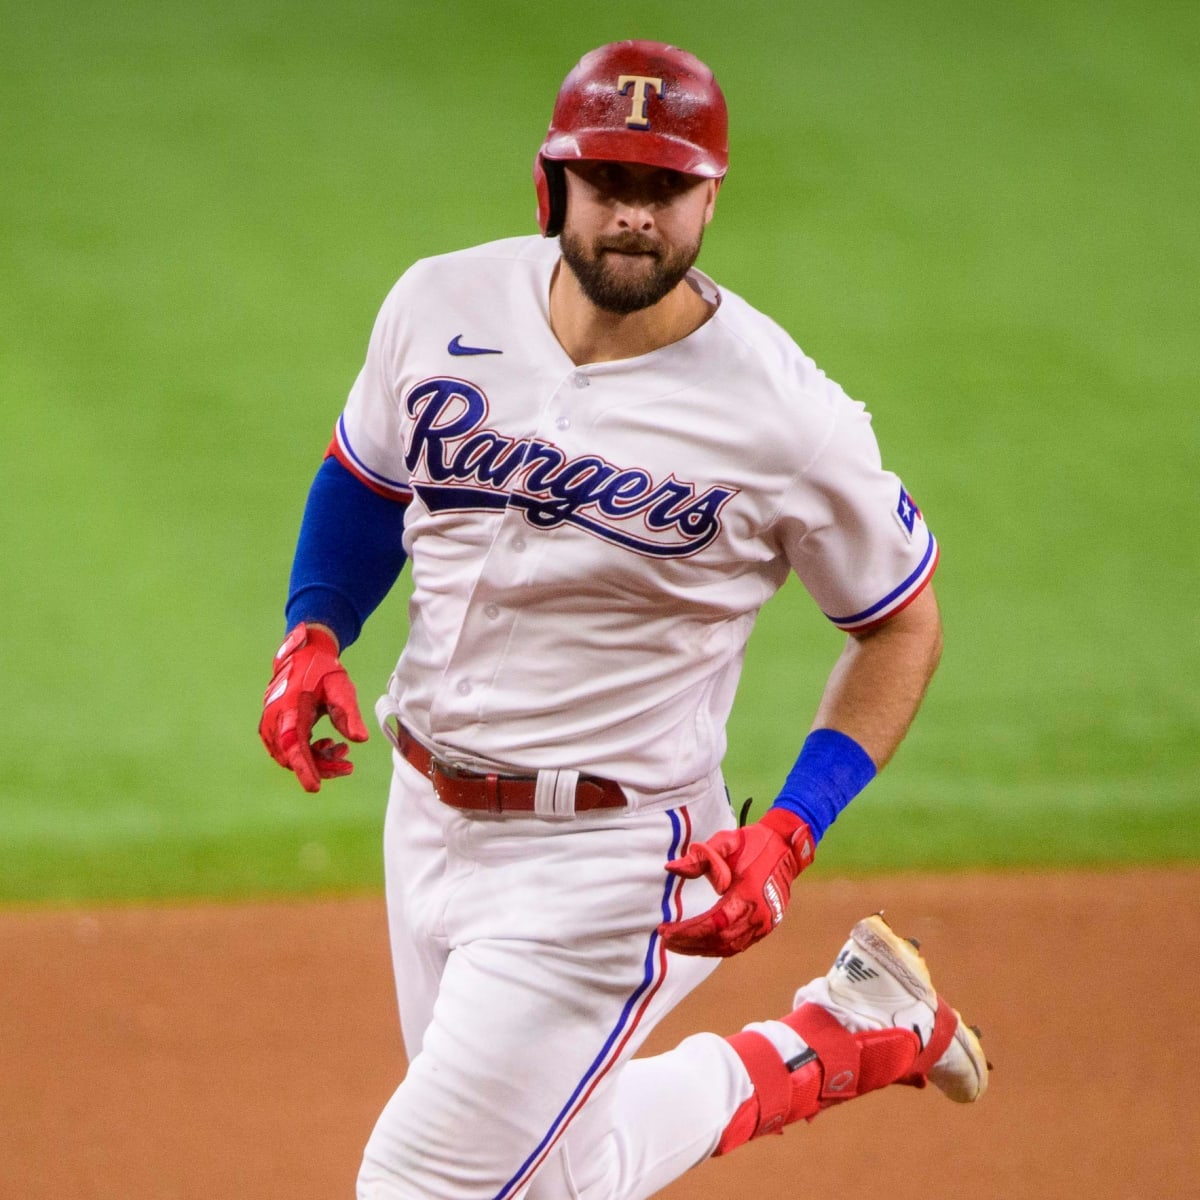 Yankees to add All-Star slugger Joey Gallo in trade with Rangers 